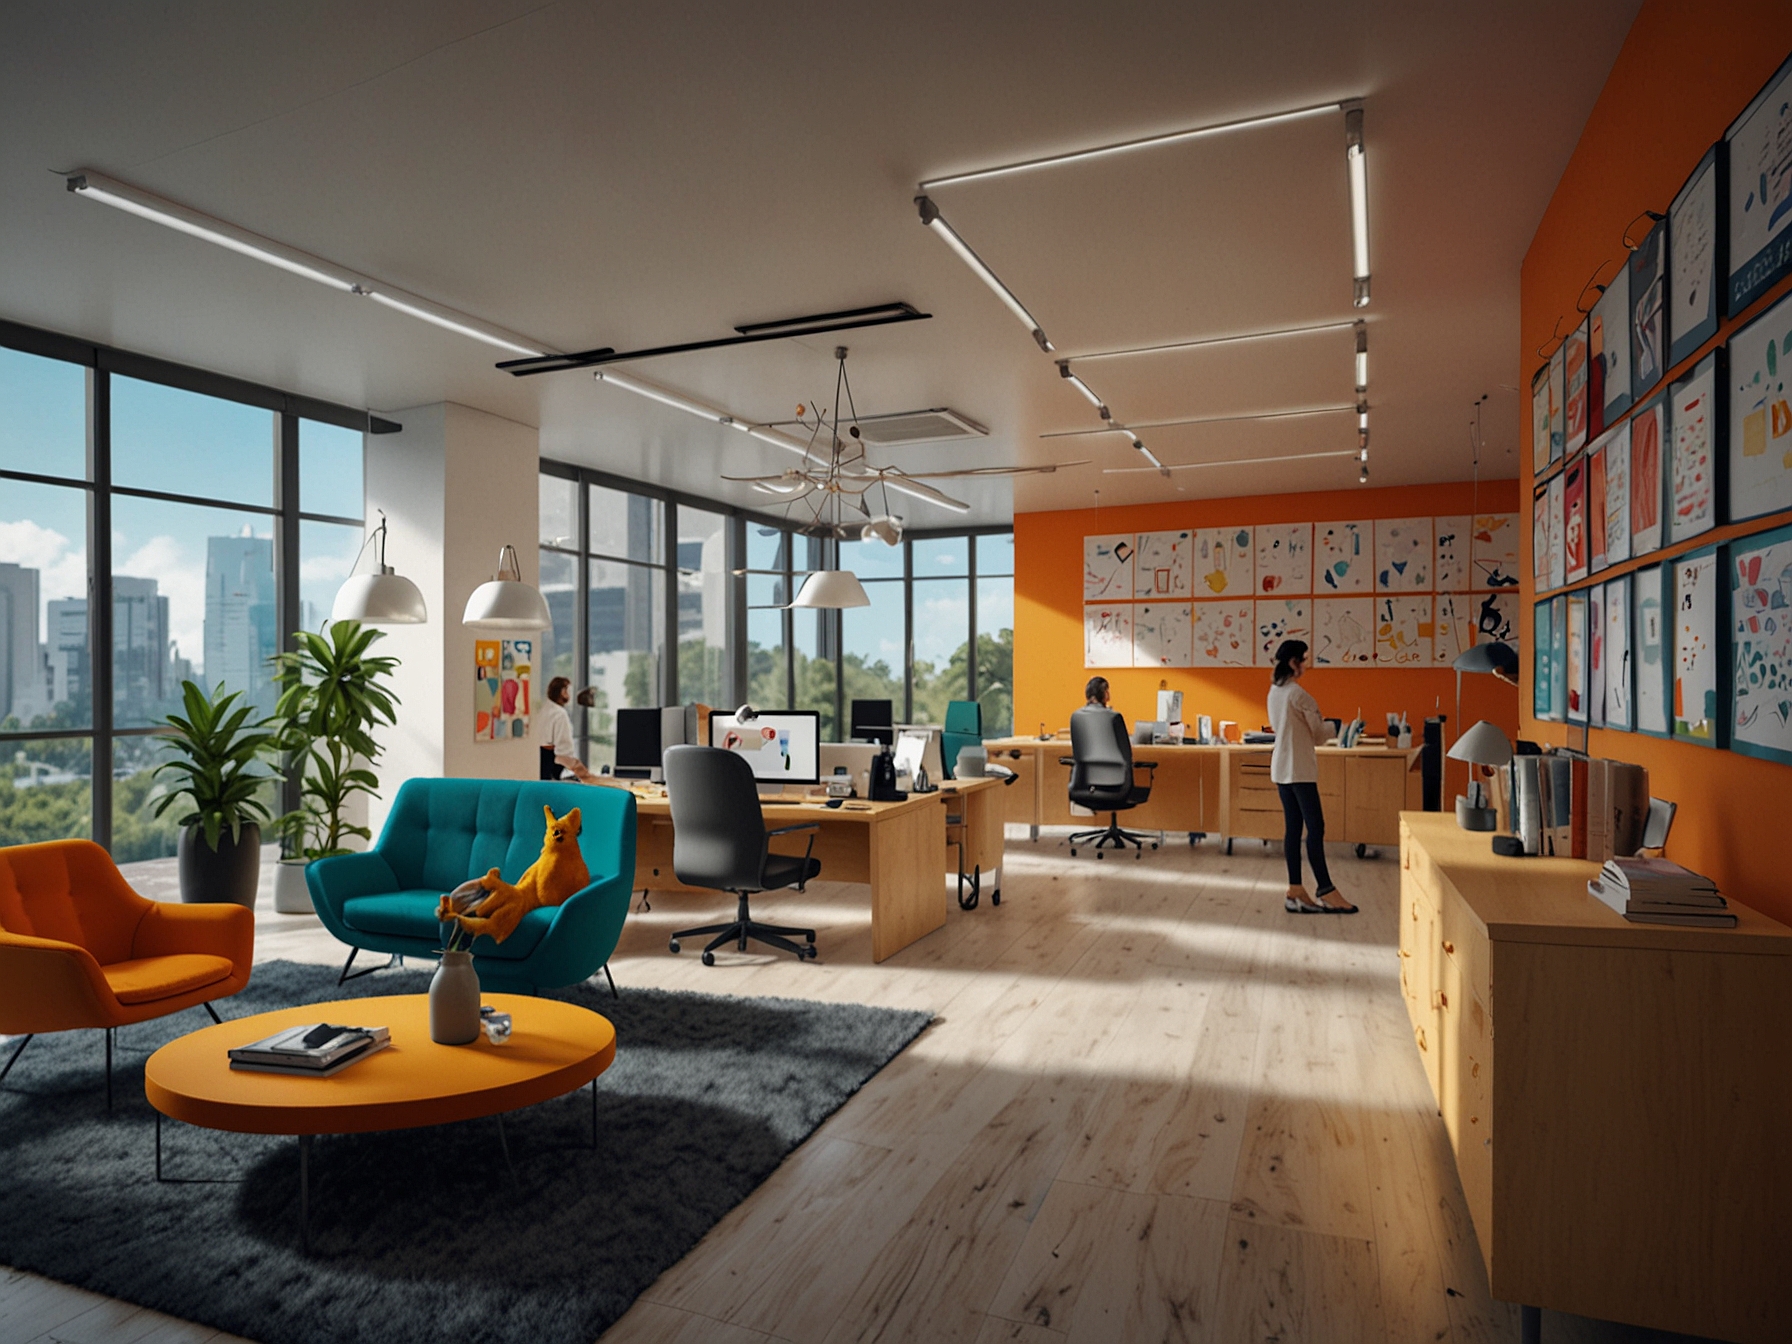 A vibrant office environment where Zenvia's team collaborates on innovative customer experience solutions, reflecting the company's commitment to product development and technological advancements.